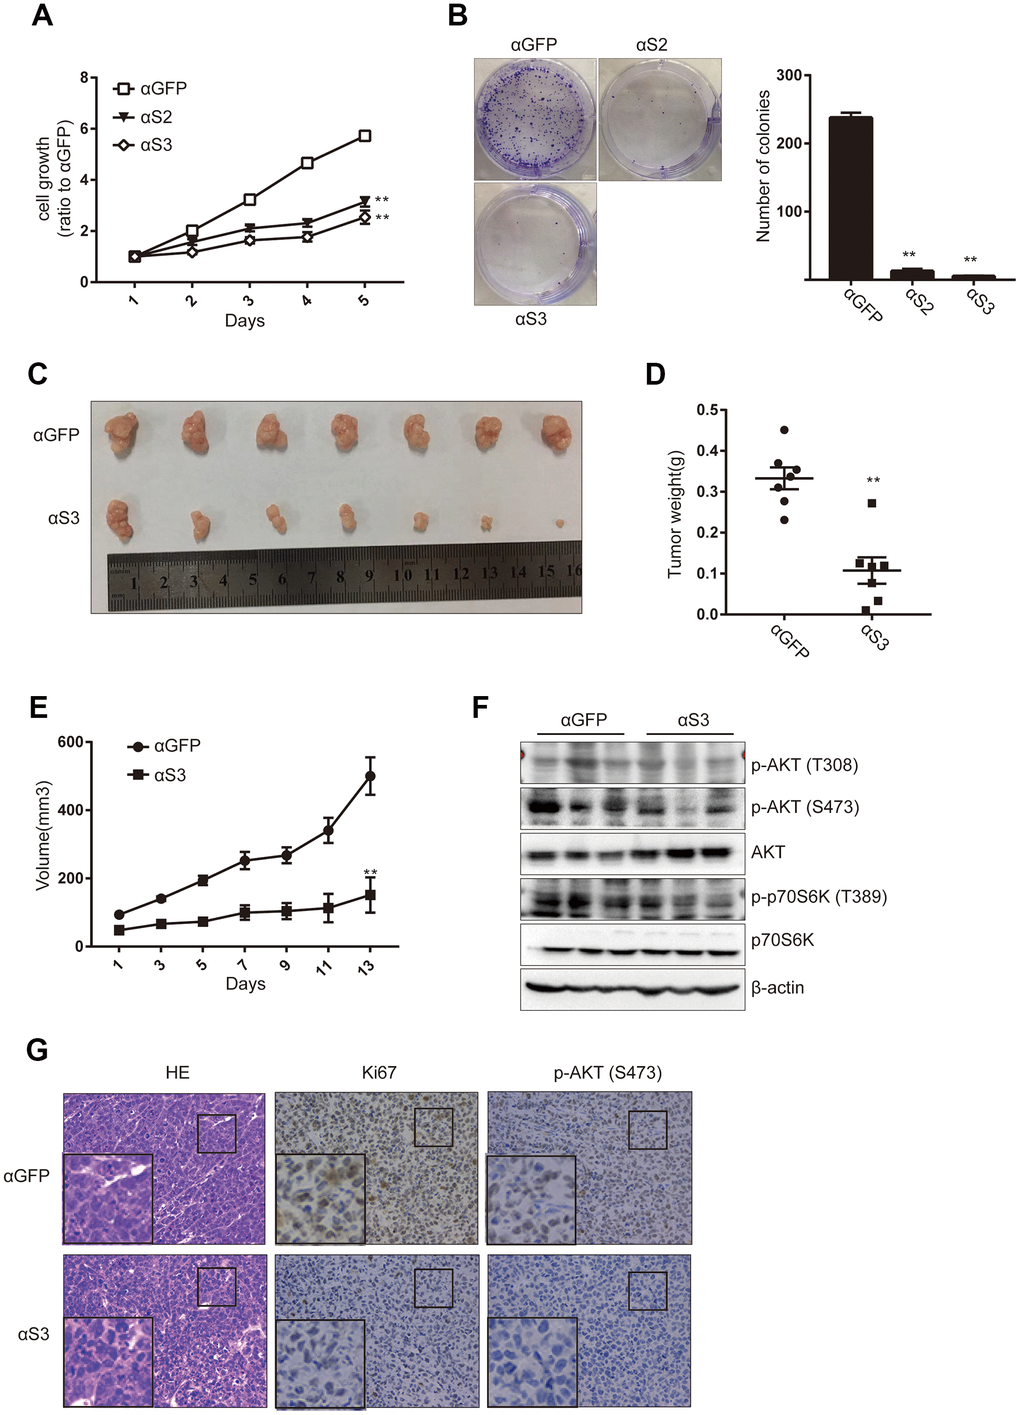 ASOs targeting snoRD126 inhibit tumour growth in vivo. (A) CCK8 assay was performed after transiently transfected HepG2 cells with snoRD126 ASOs. (B) Colony formation assay was performed in HepG2 cells after transfected with snoRD126 ASOs. Quantification of the colonies normalized to αGFP group is presented. (C) The xenograft tumours photograph after injecting snoRD126 ASOs into subcutaneous tumours. (D) Tumour weight is presented. (E) Tumour volume is presented. (F) WB assay was used to analyze the changes of the indicated protein levels in tumours. (G) Immunohistochemistry showing intratumoral injection of aS3 led to an increase of Ki67 protein and phosphorylation of AKT levels. Mean ± SD. ** p 